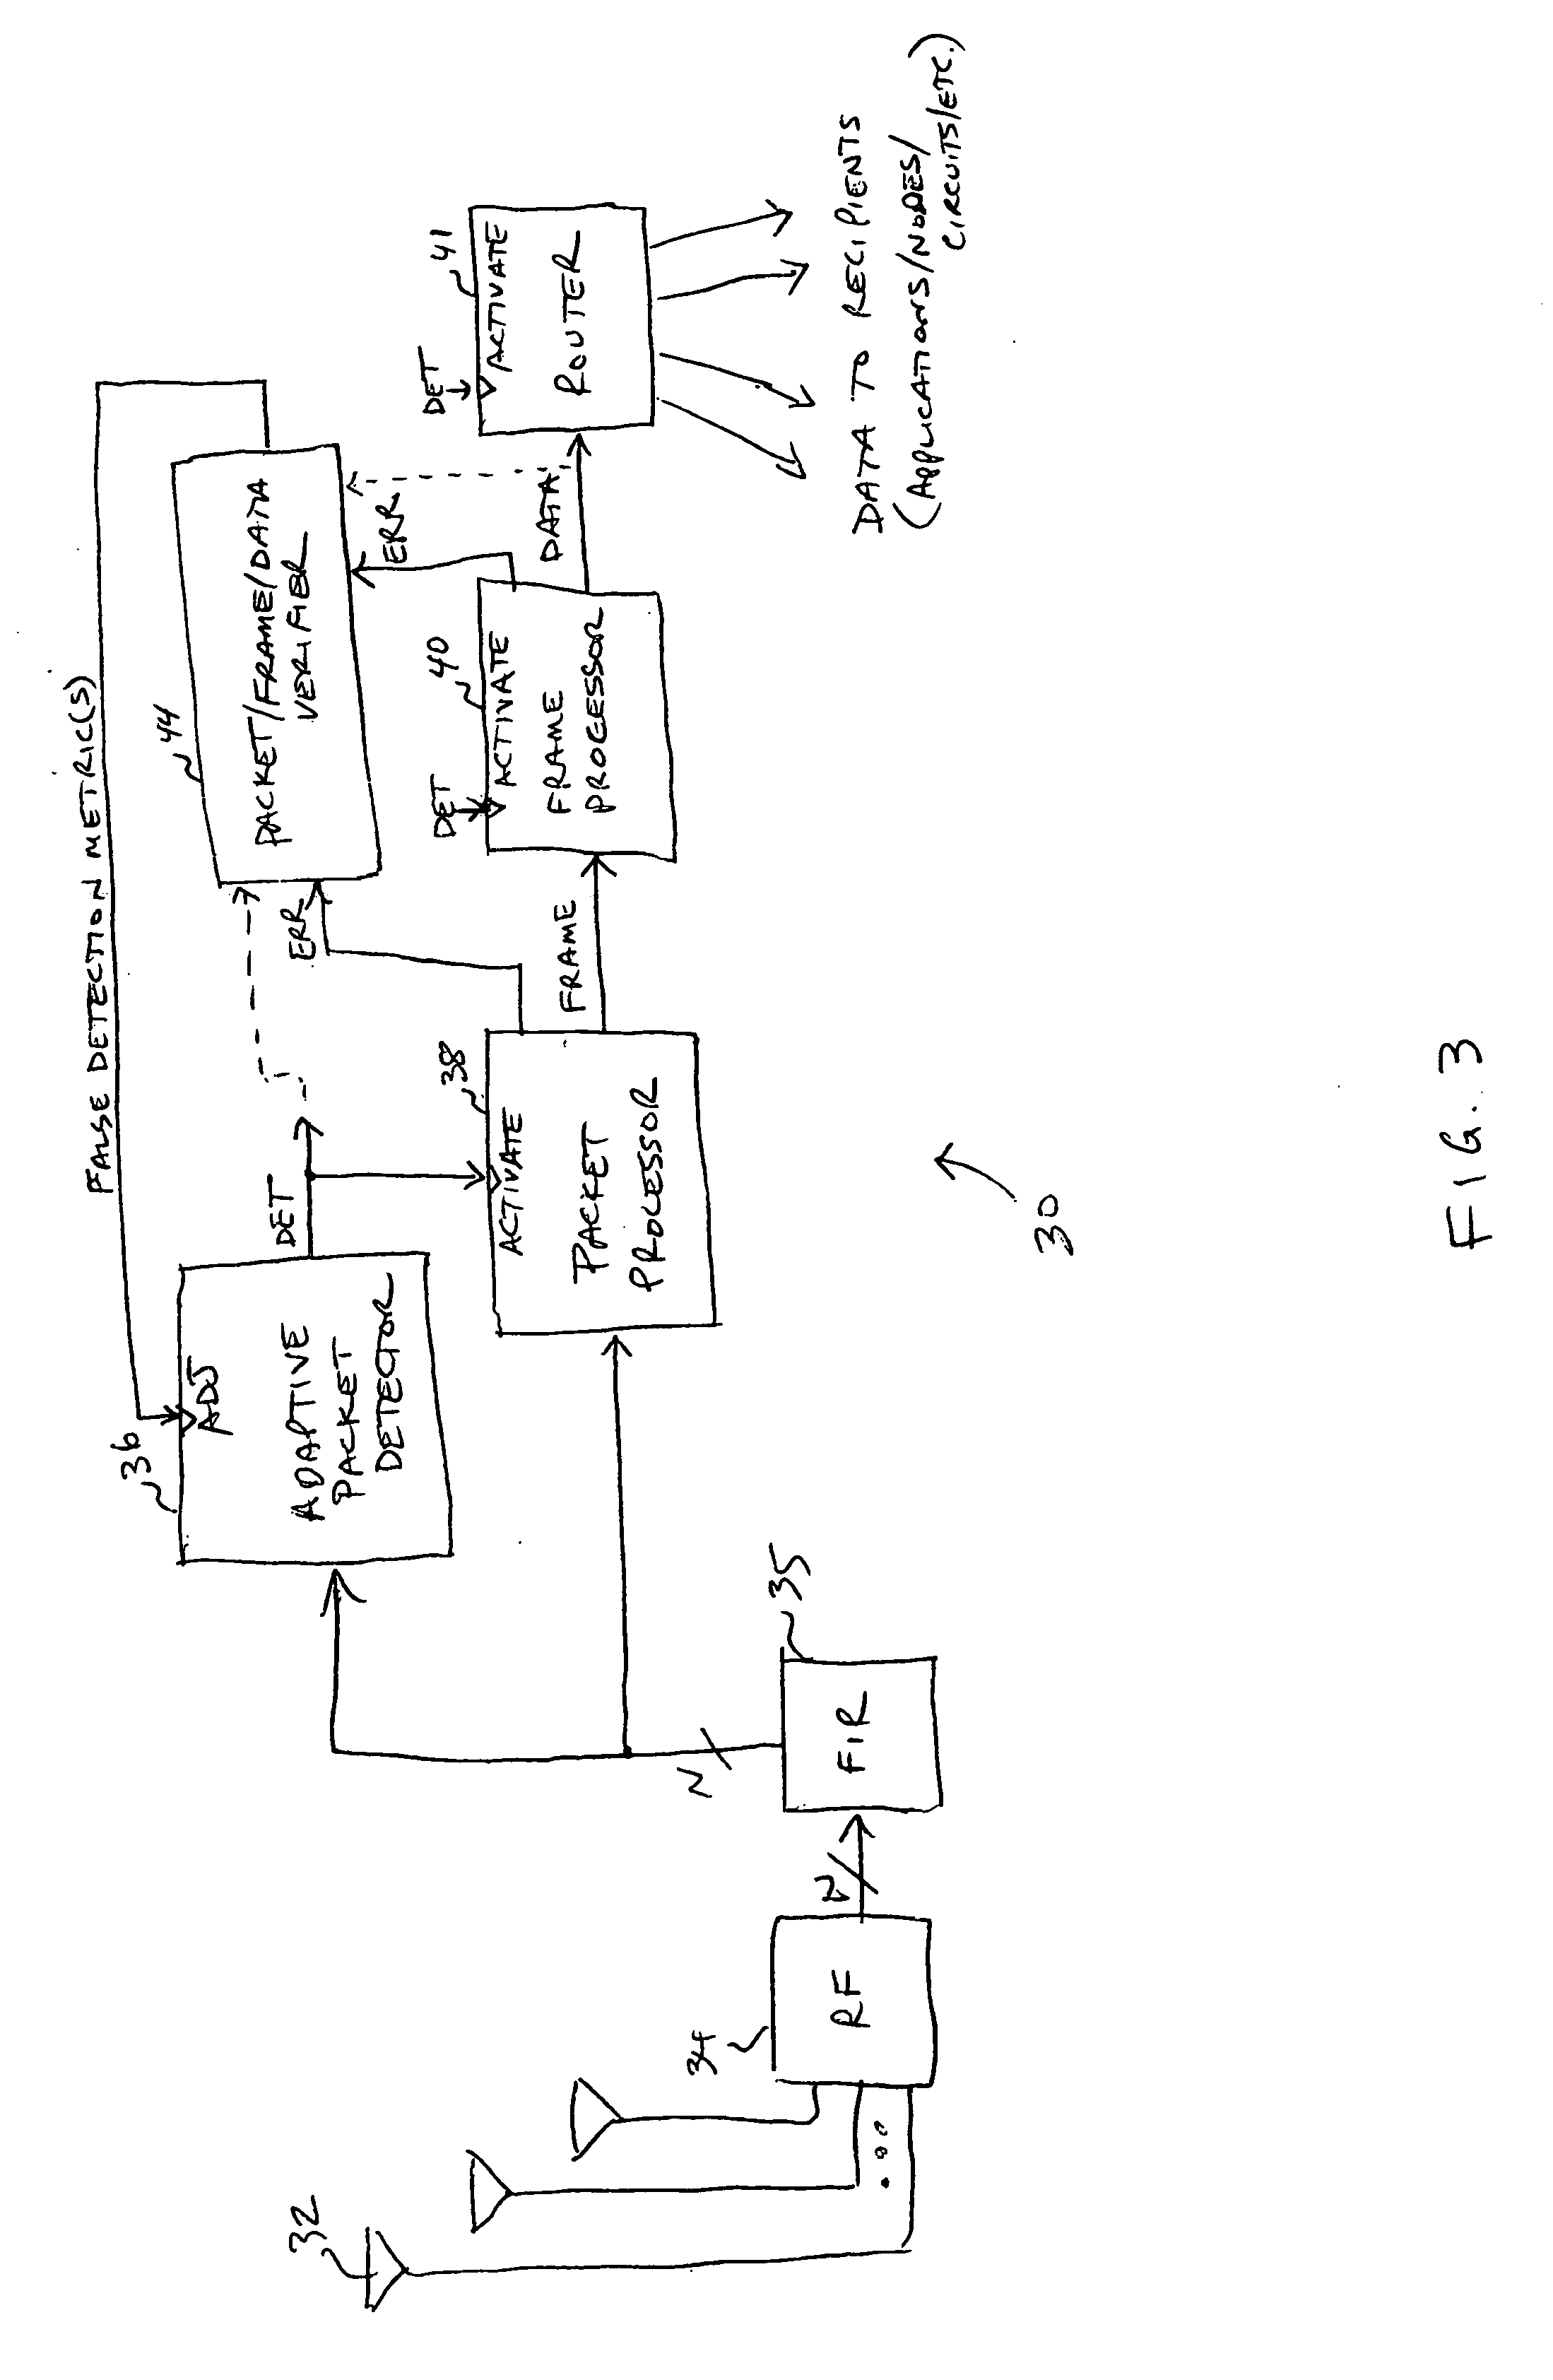 Adaptive packet detection for detecting packets in a wireless medium